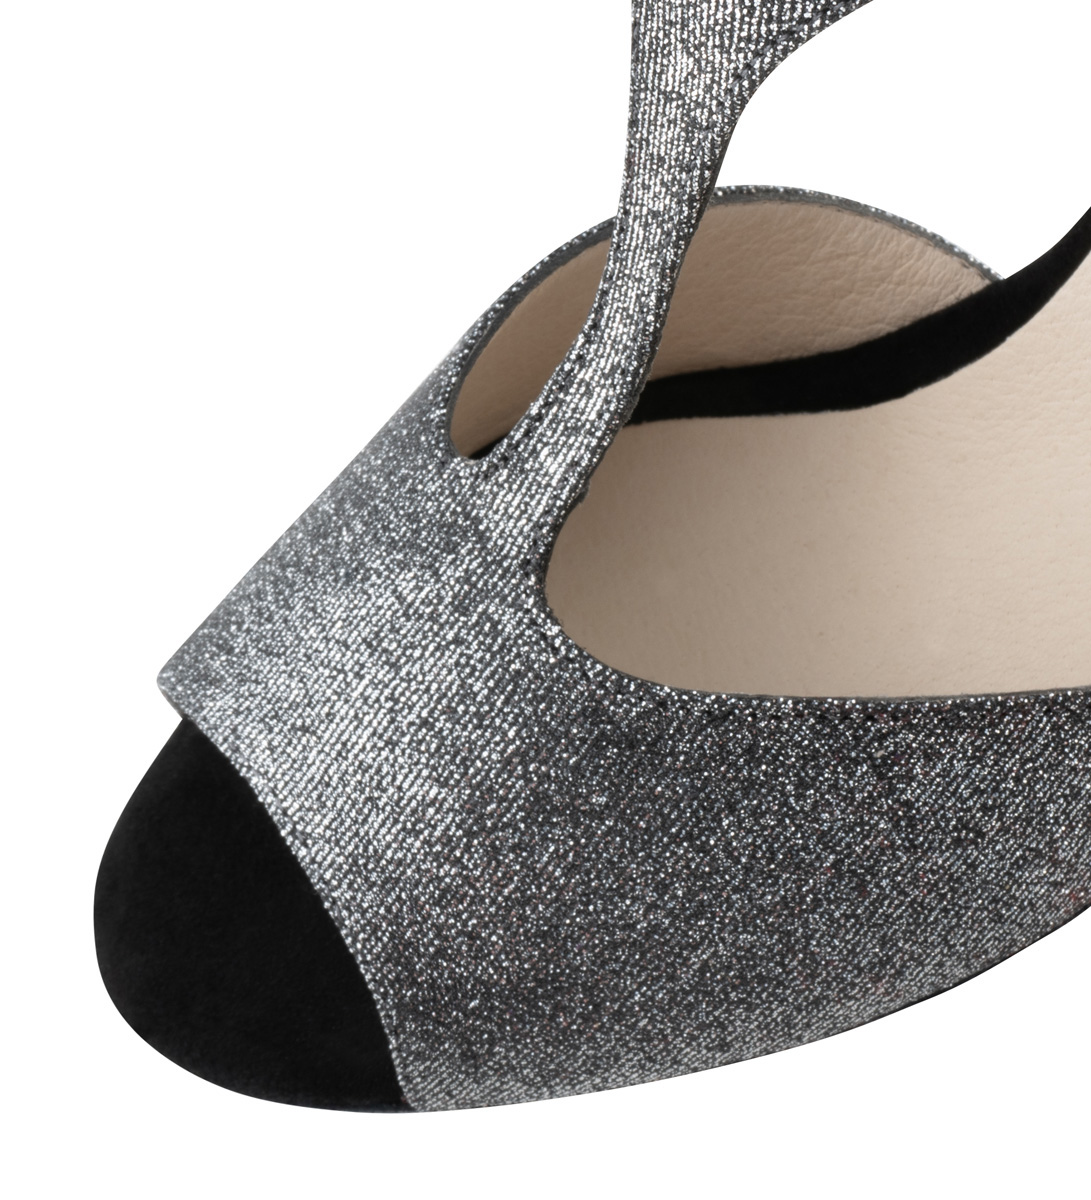 Detailed view of the Werner Kern women's dance shoe in silver-black